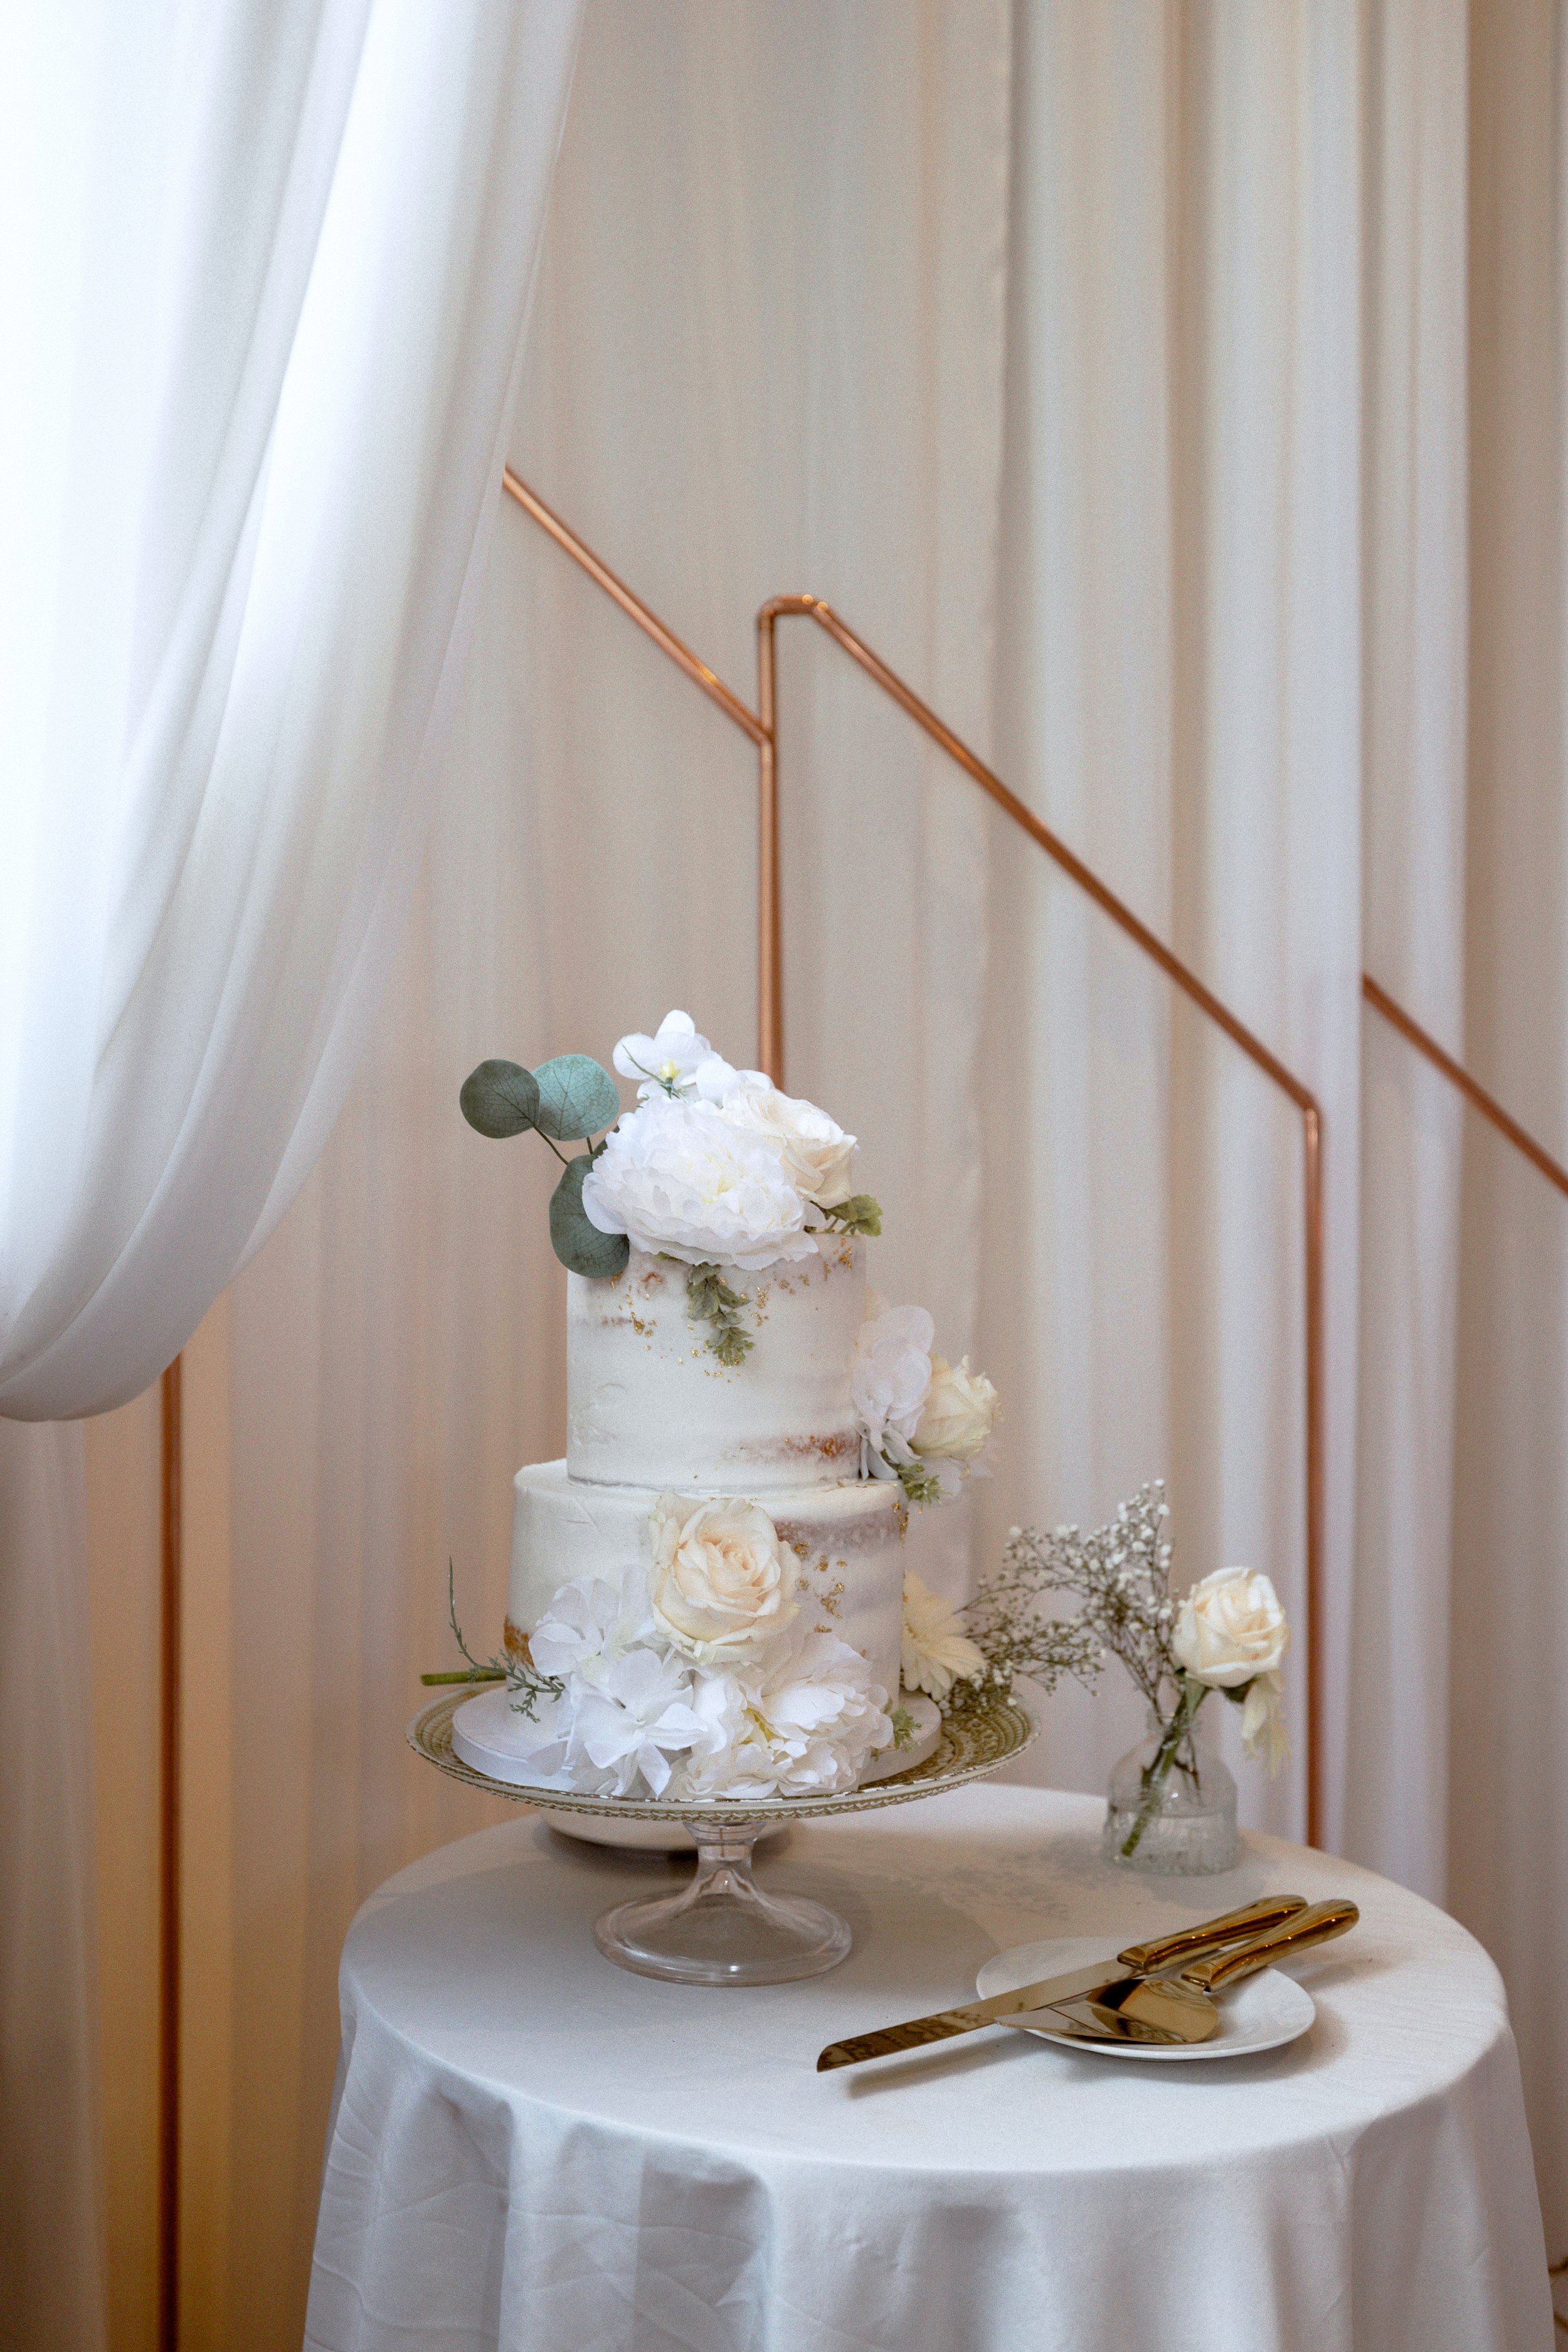 2-tier traditional wedding cake for a multicultural wedding